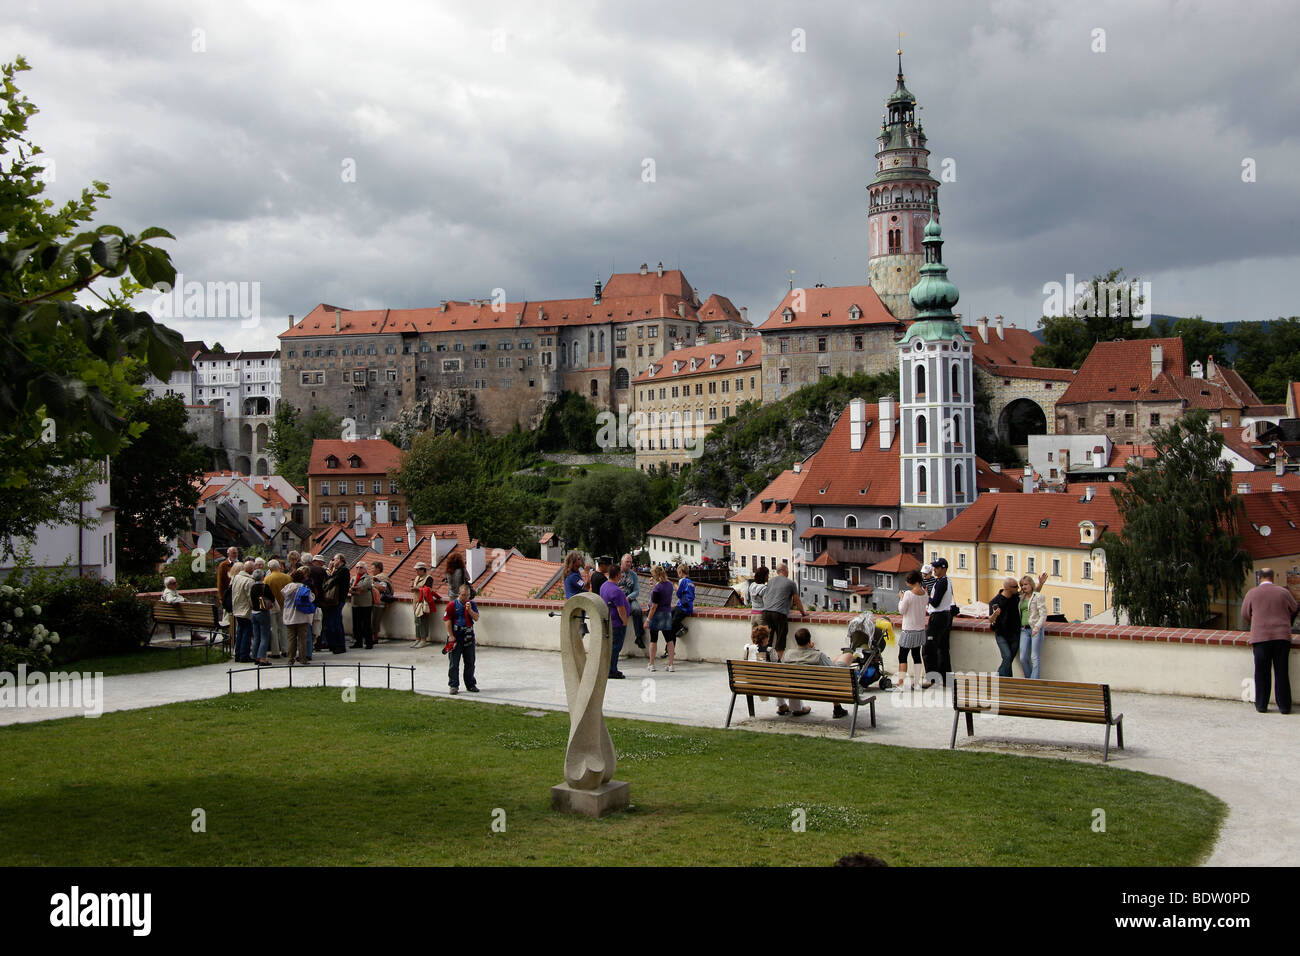 view point in front of St. Jost Church and castle, Cesky Krumlov, Czech Republic, Europe Stock Photo